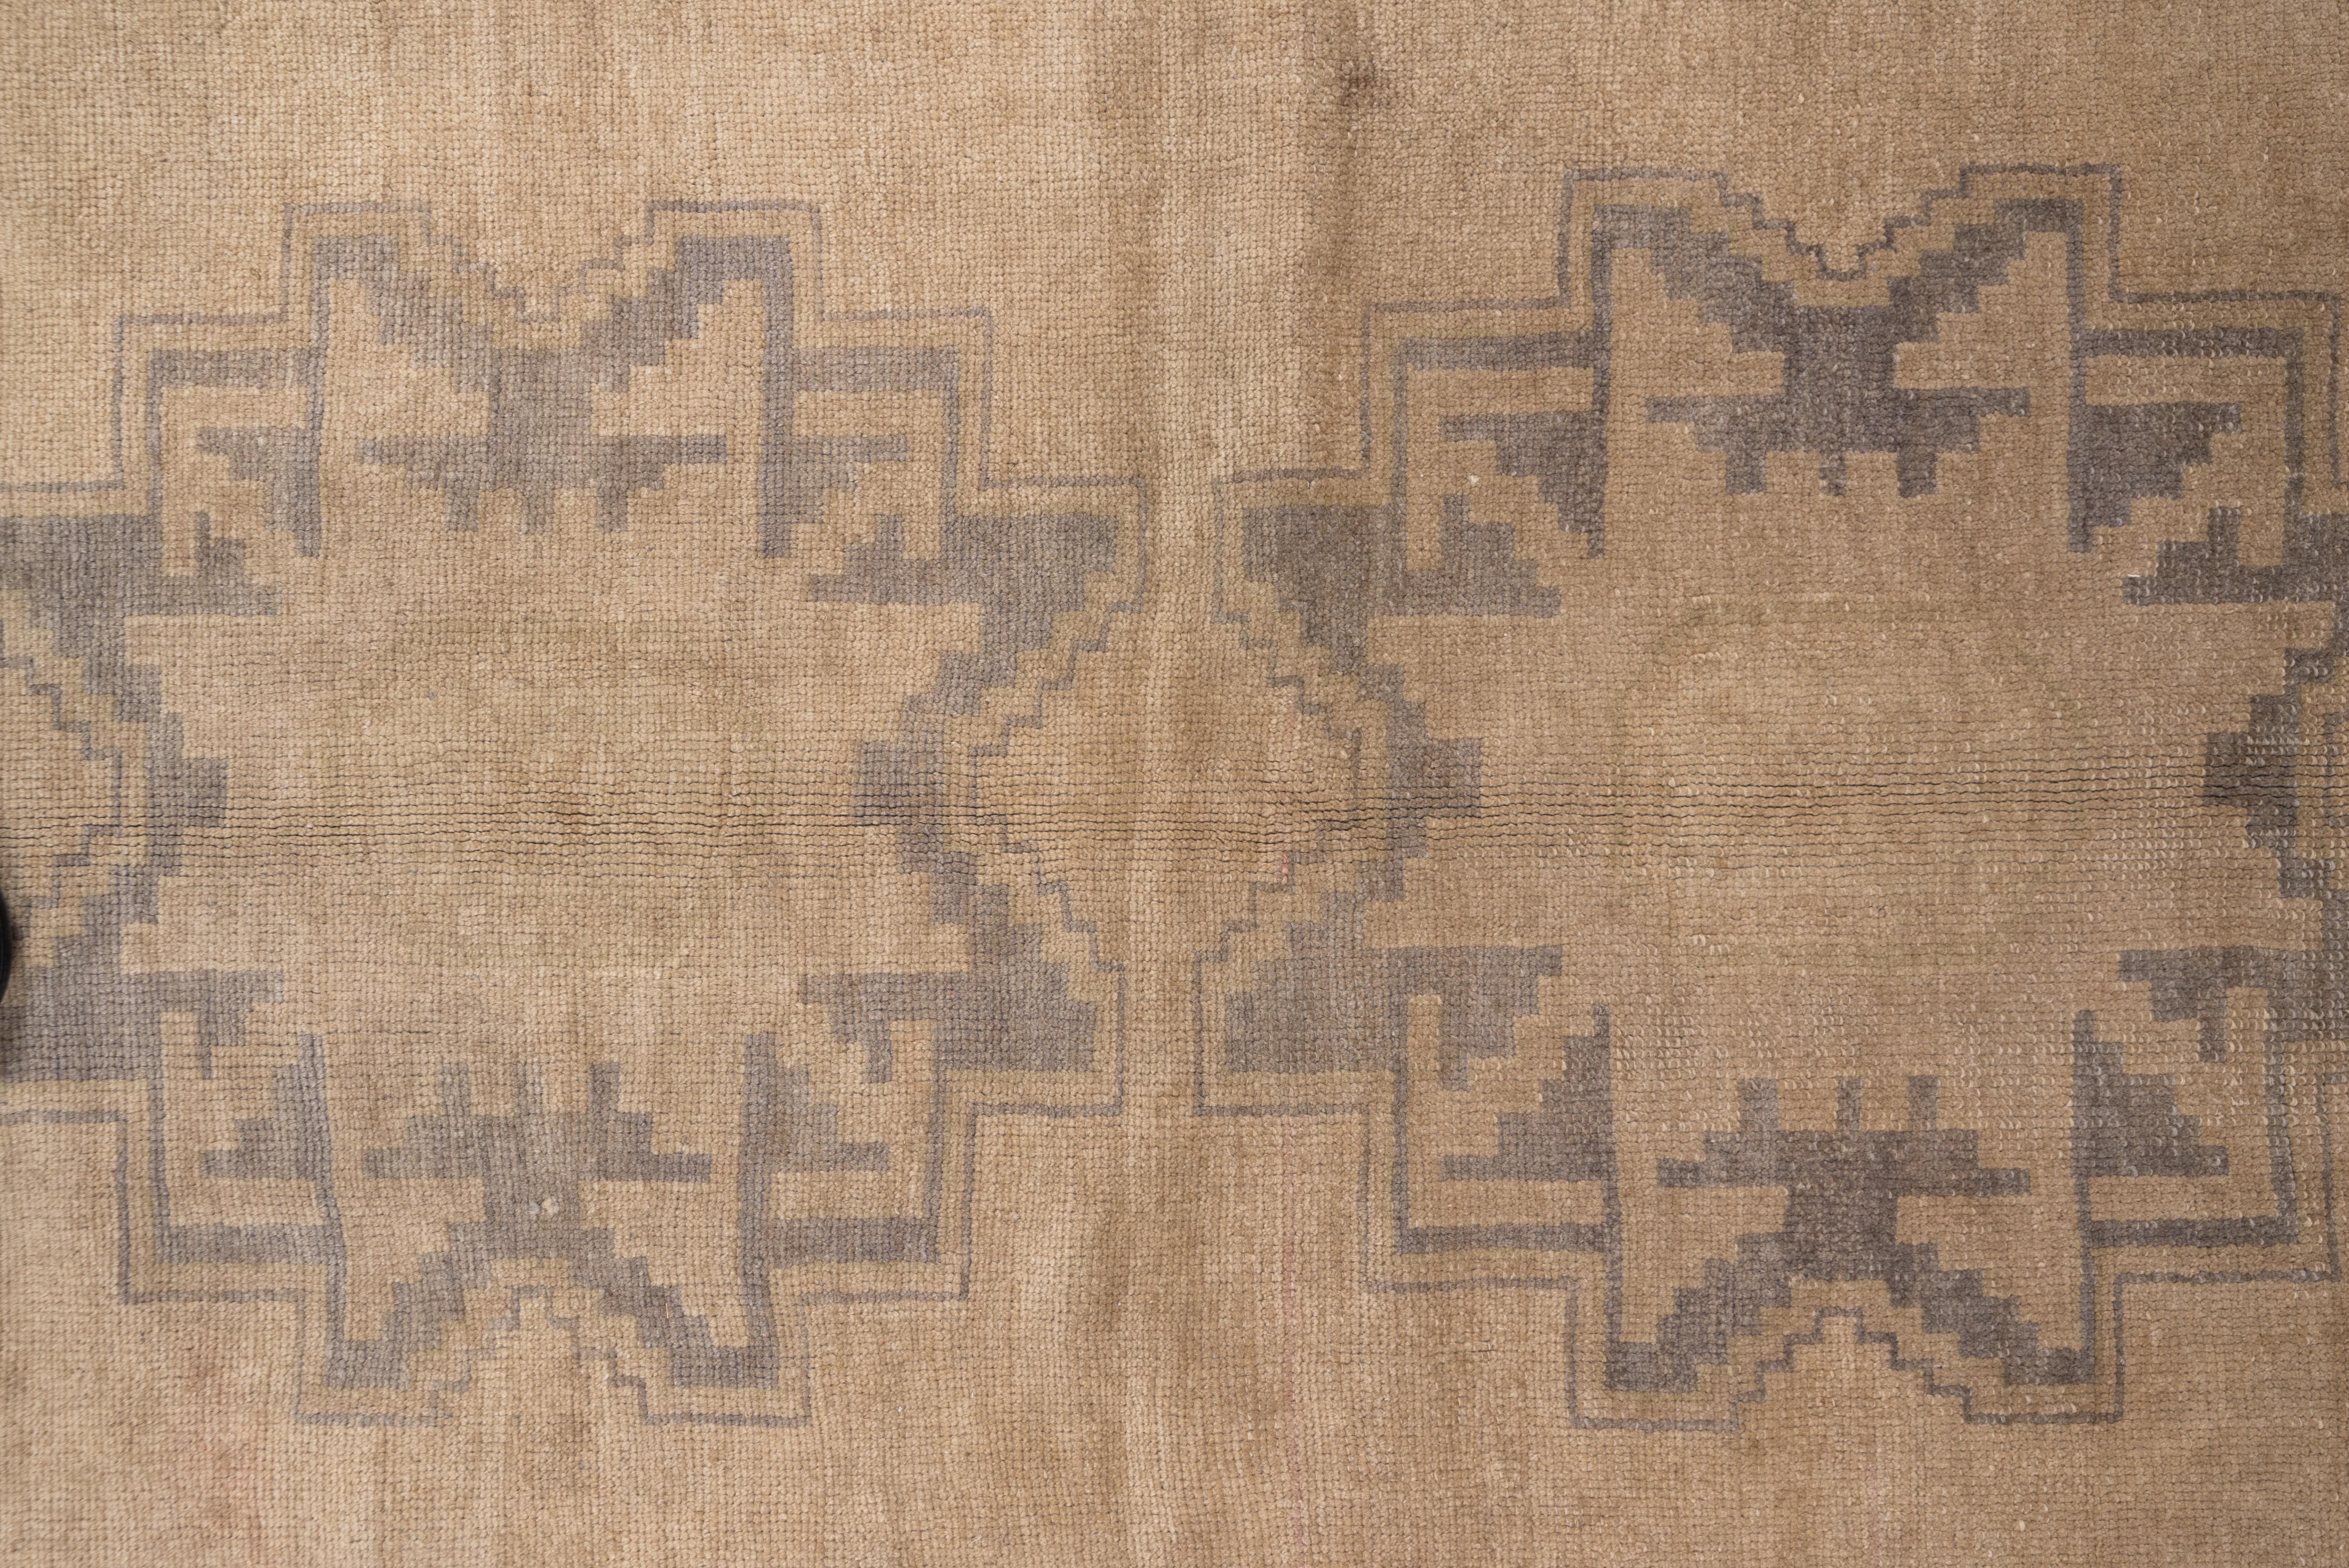 Mid-20th Century Antique Turkish Oushak Long Rug, Beige Field & Graphite Blue Accents For Sale